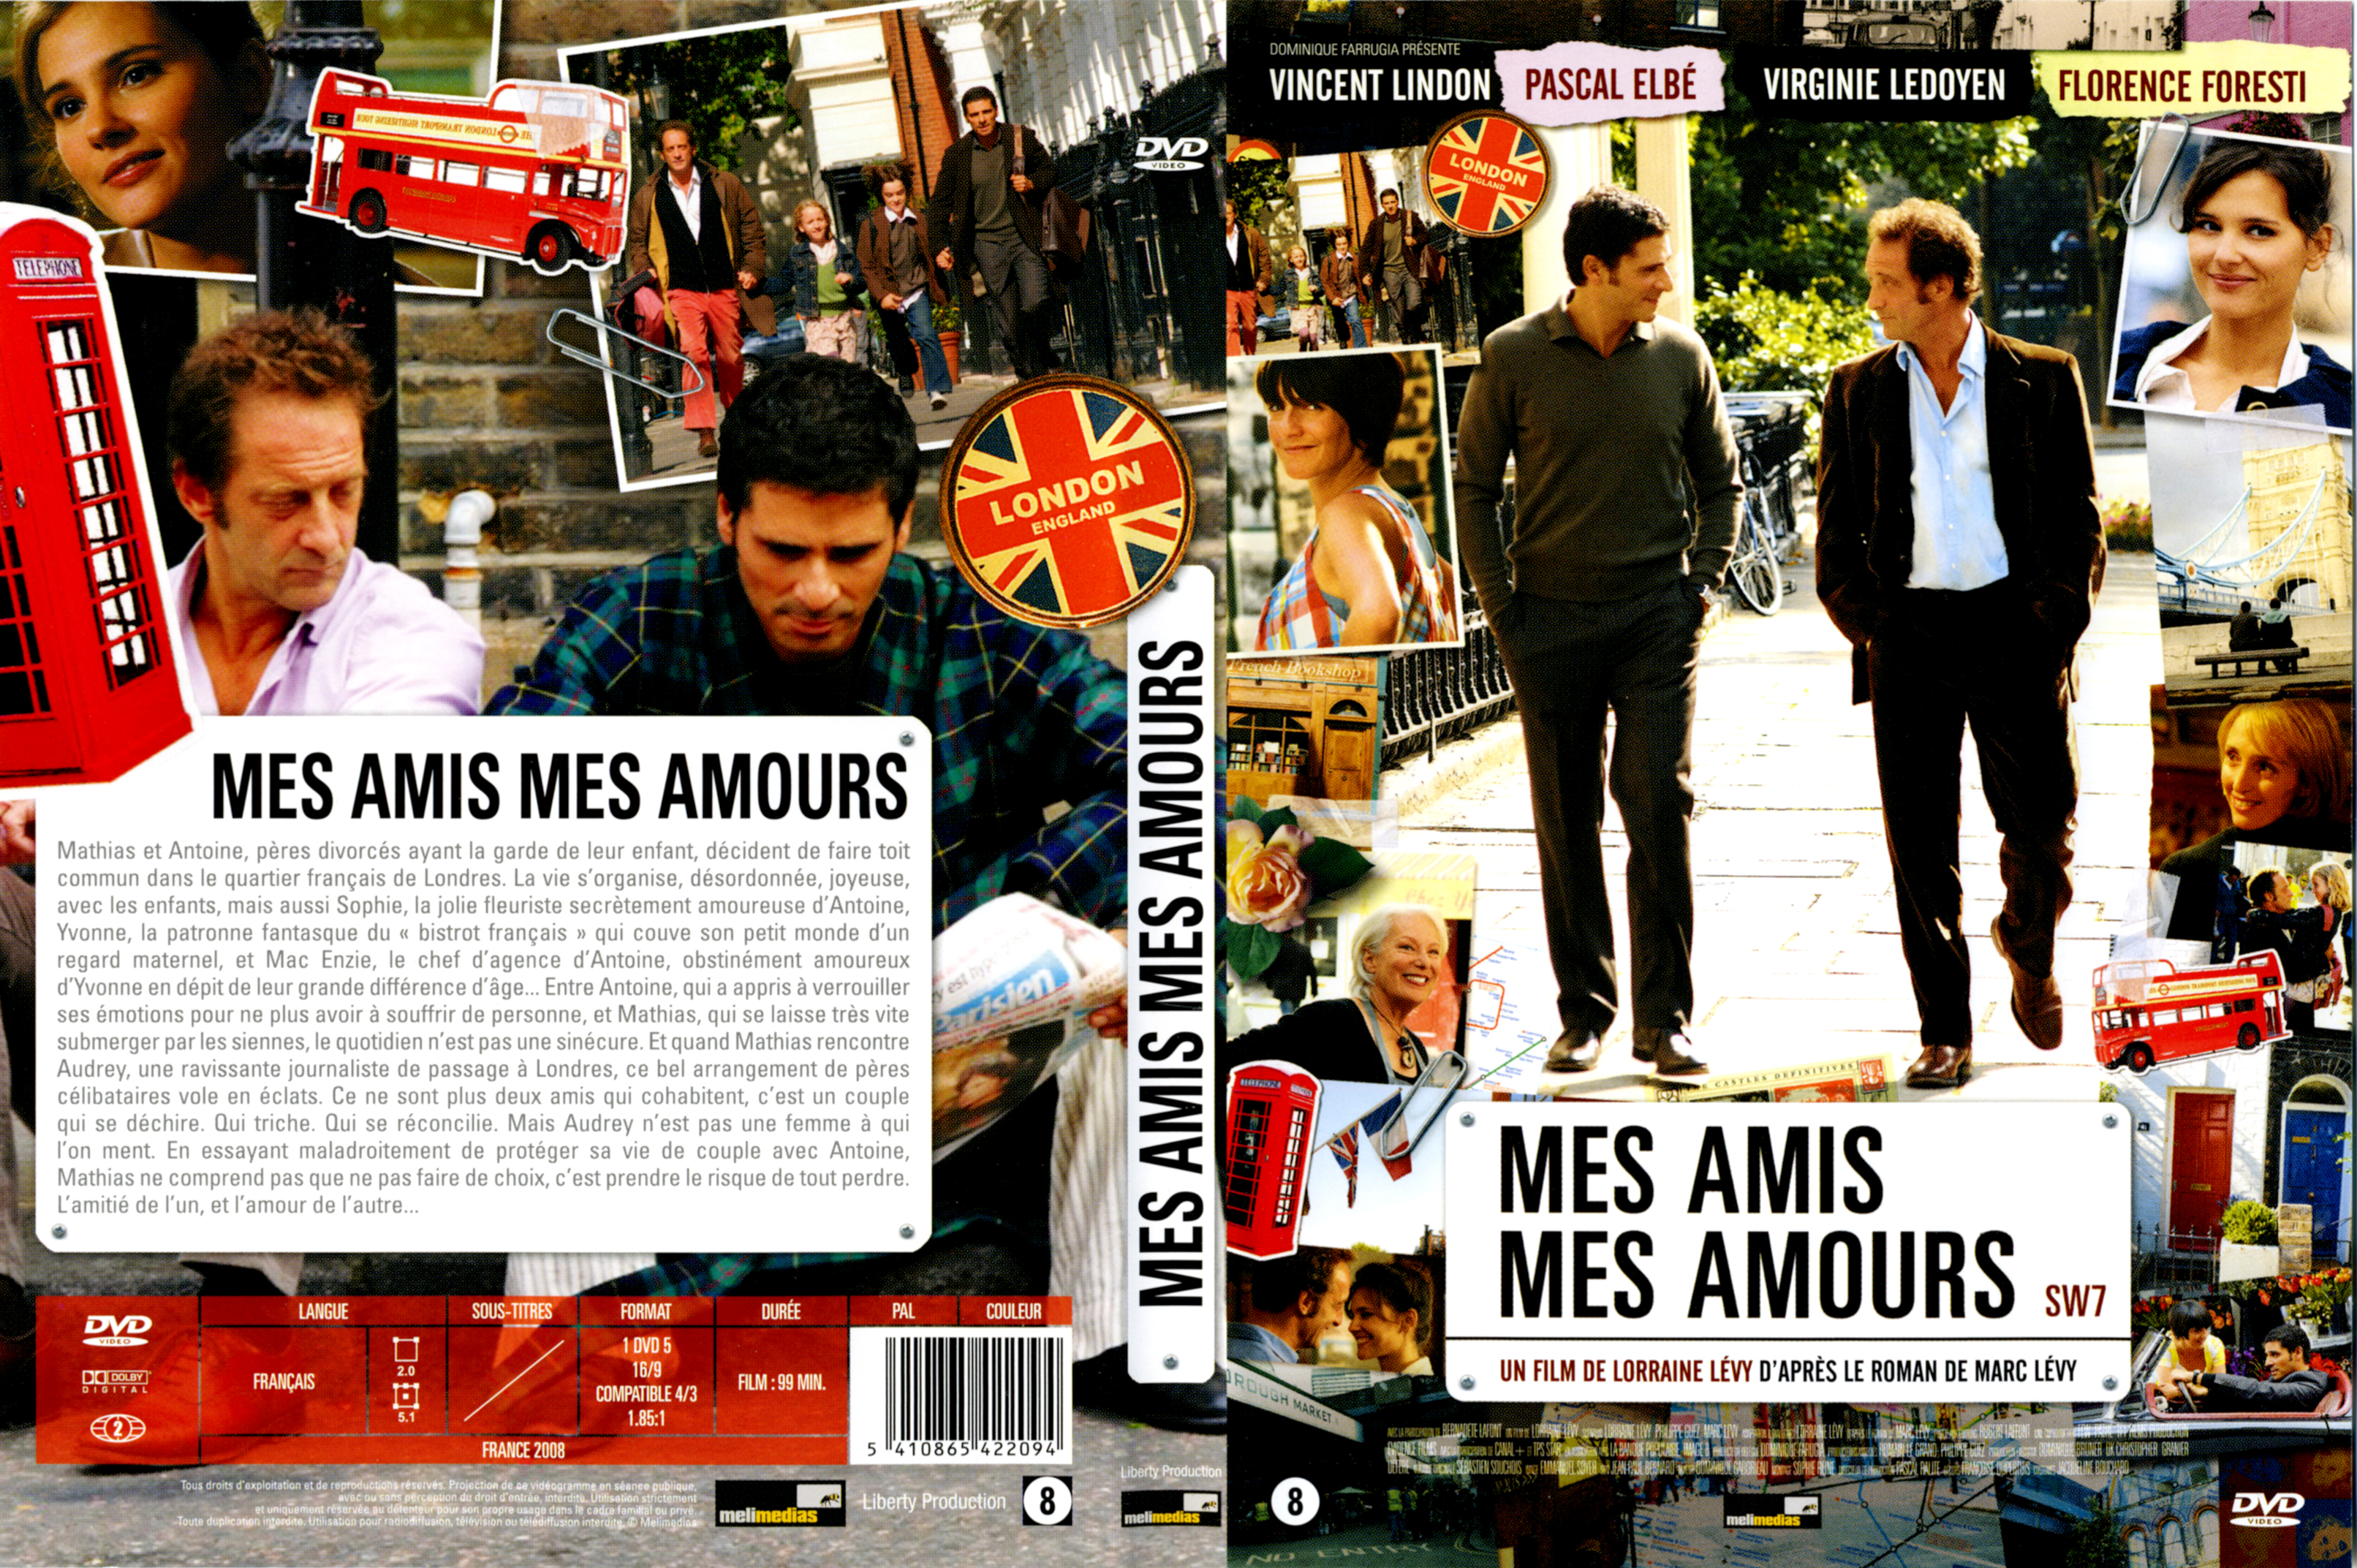 Jaquette DVD Mes amis mes amours